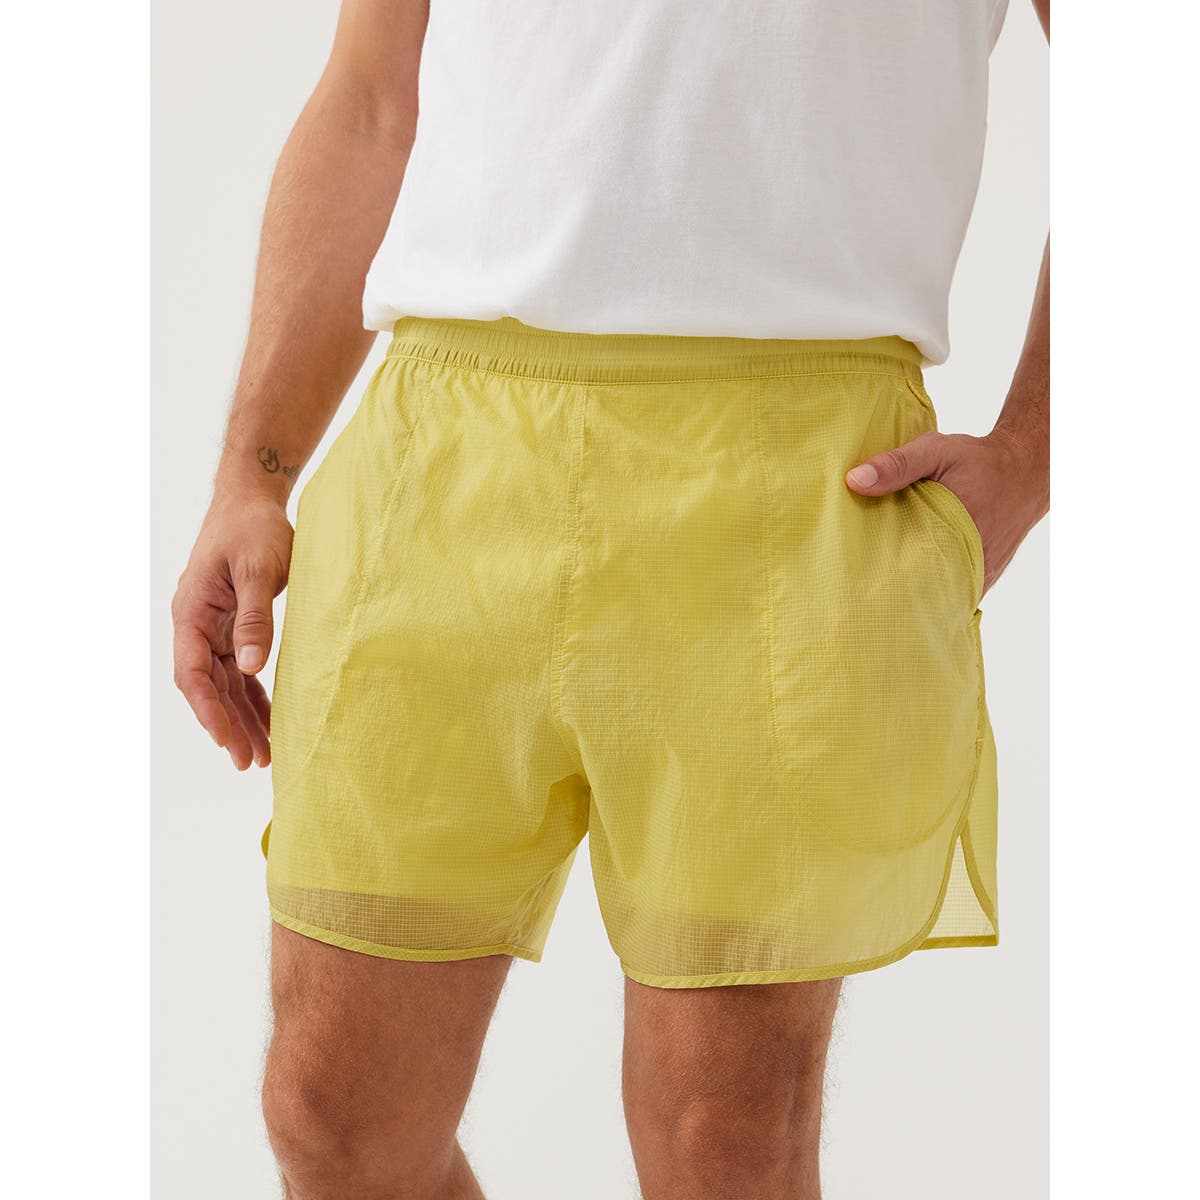 Outdoor Voices NWT Pear BreakLite 5" Shorts Size Large